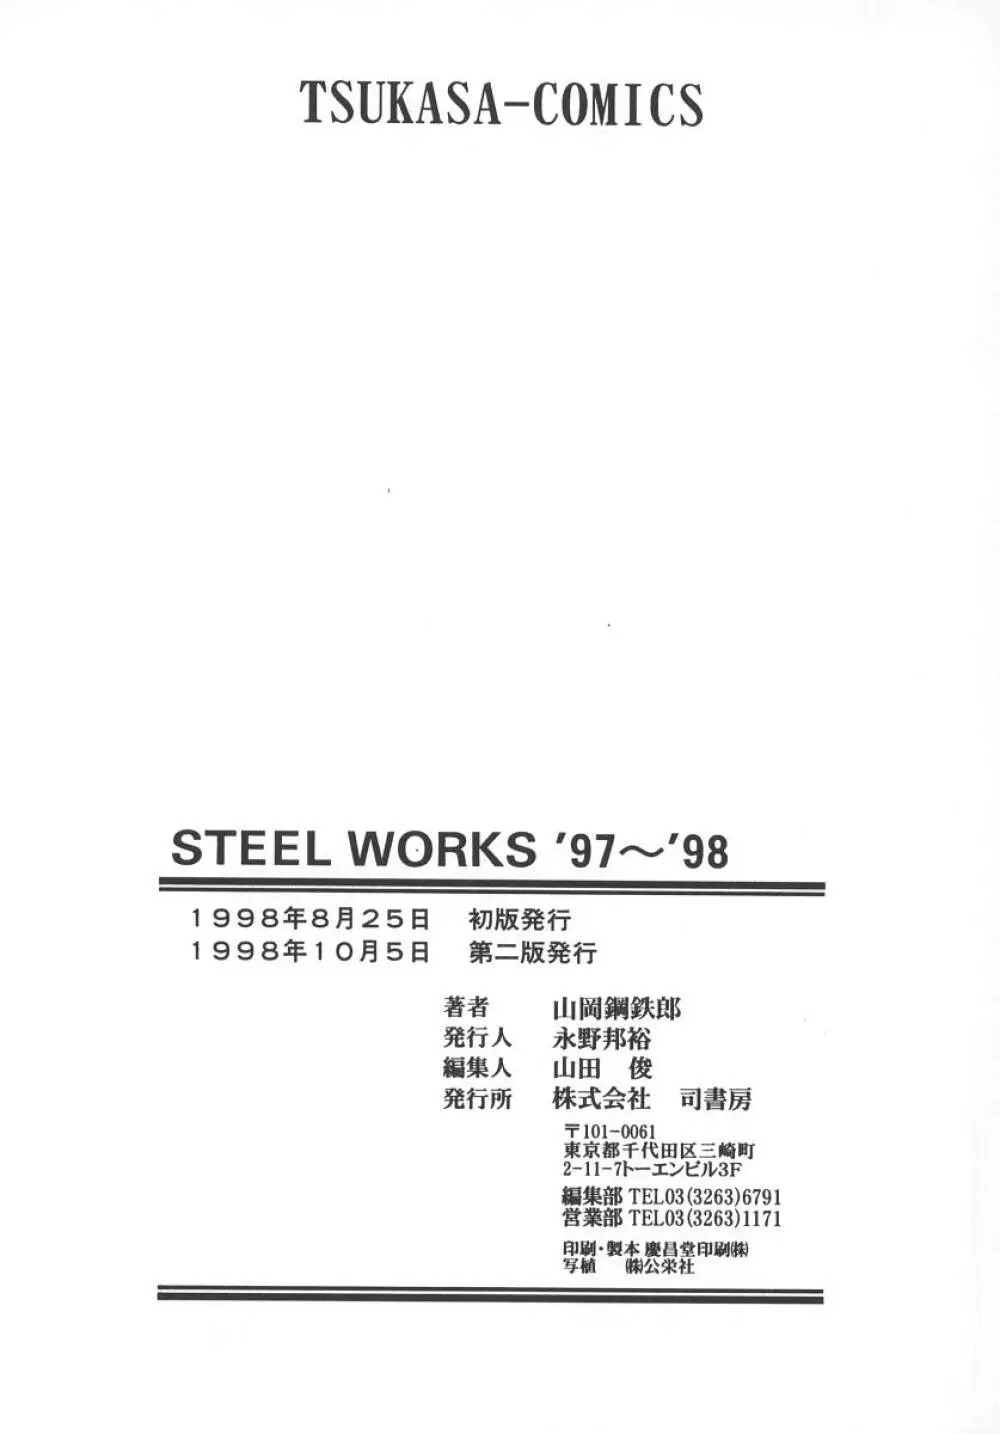 STEEL WORKS '97~'98 Page.182